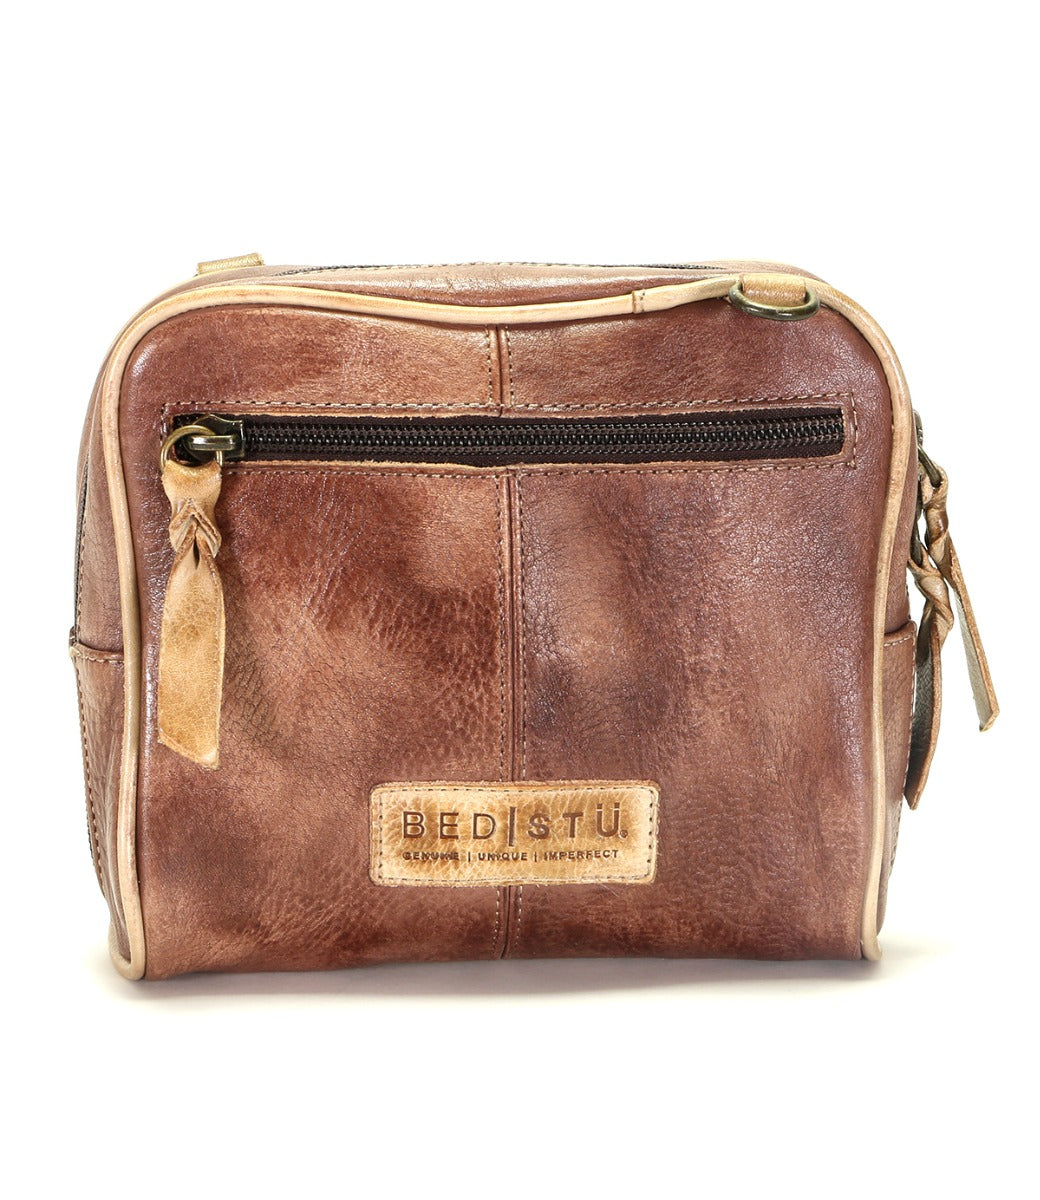 A brown leather Capture cross body bag with a zipper by Bed Stu.